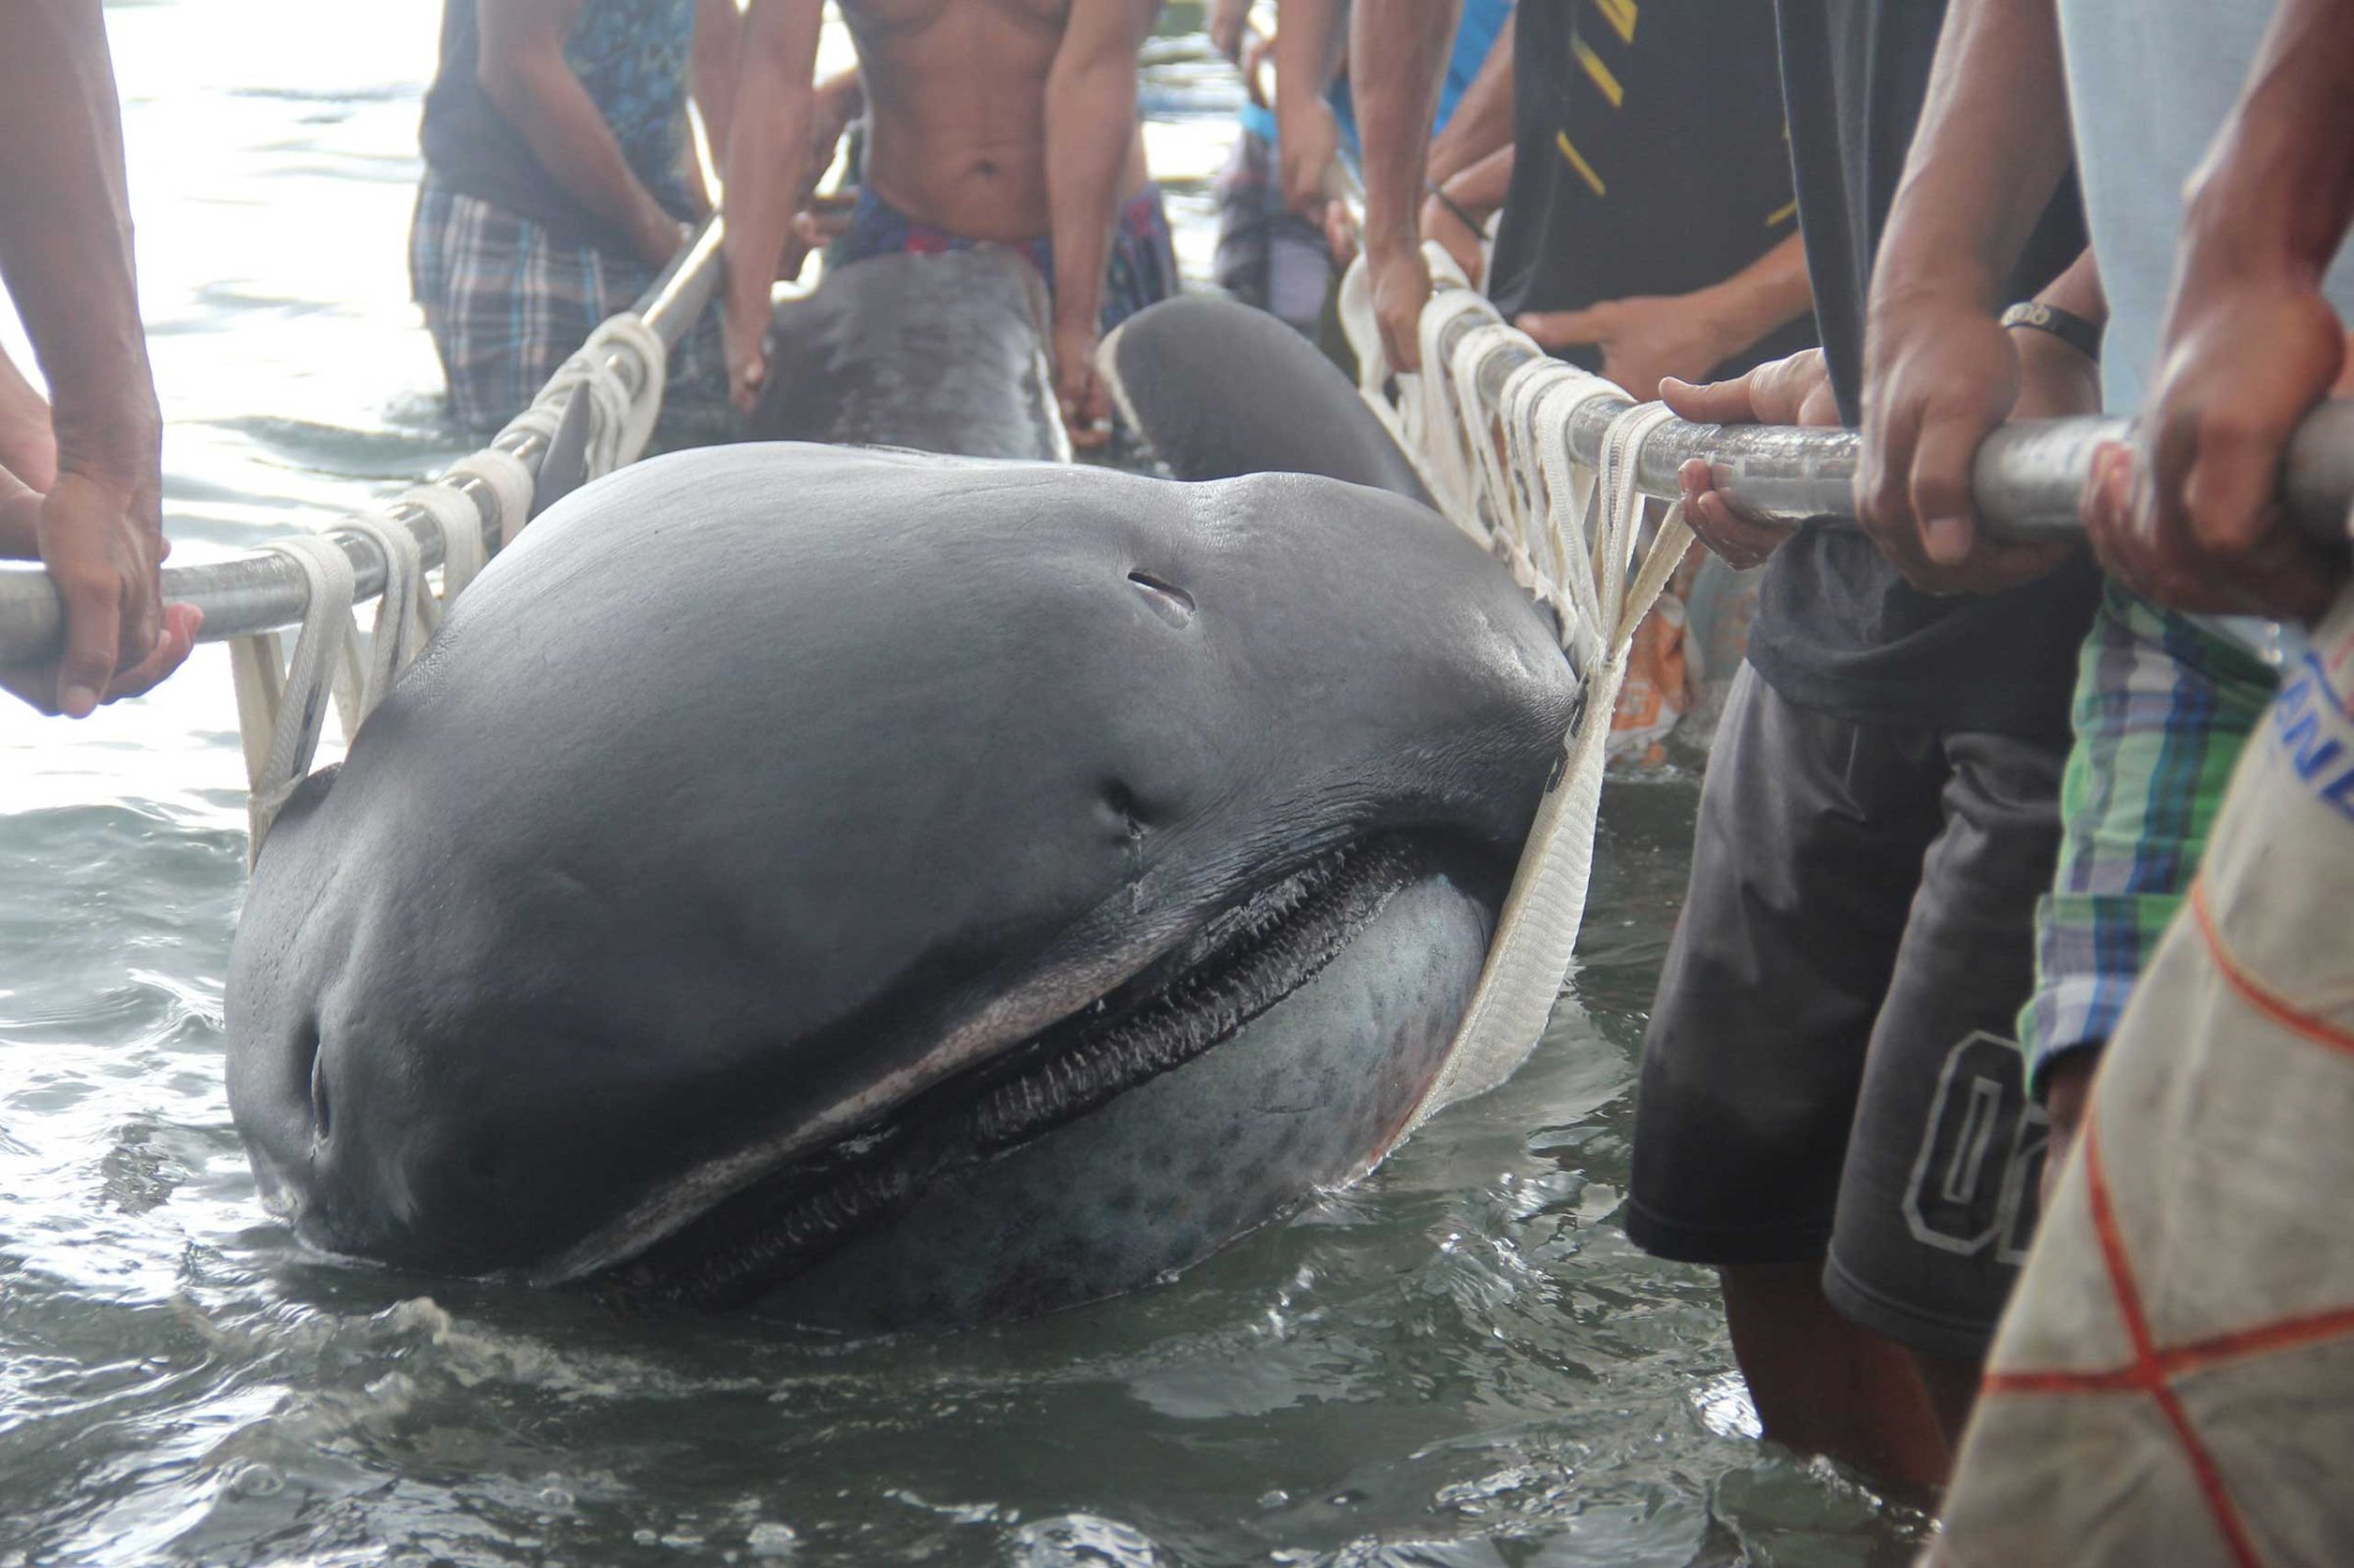 Fishermen use a stretcher with steels bars to carry a rare 15-foot megamouth shark, which was trapped in a fishermen's net in Burias Pass in Albay and Masbate provinces, central Philippines, Jan. 28, 2015.